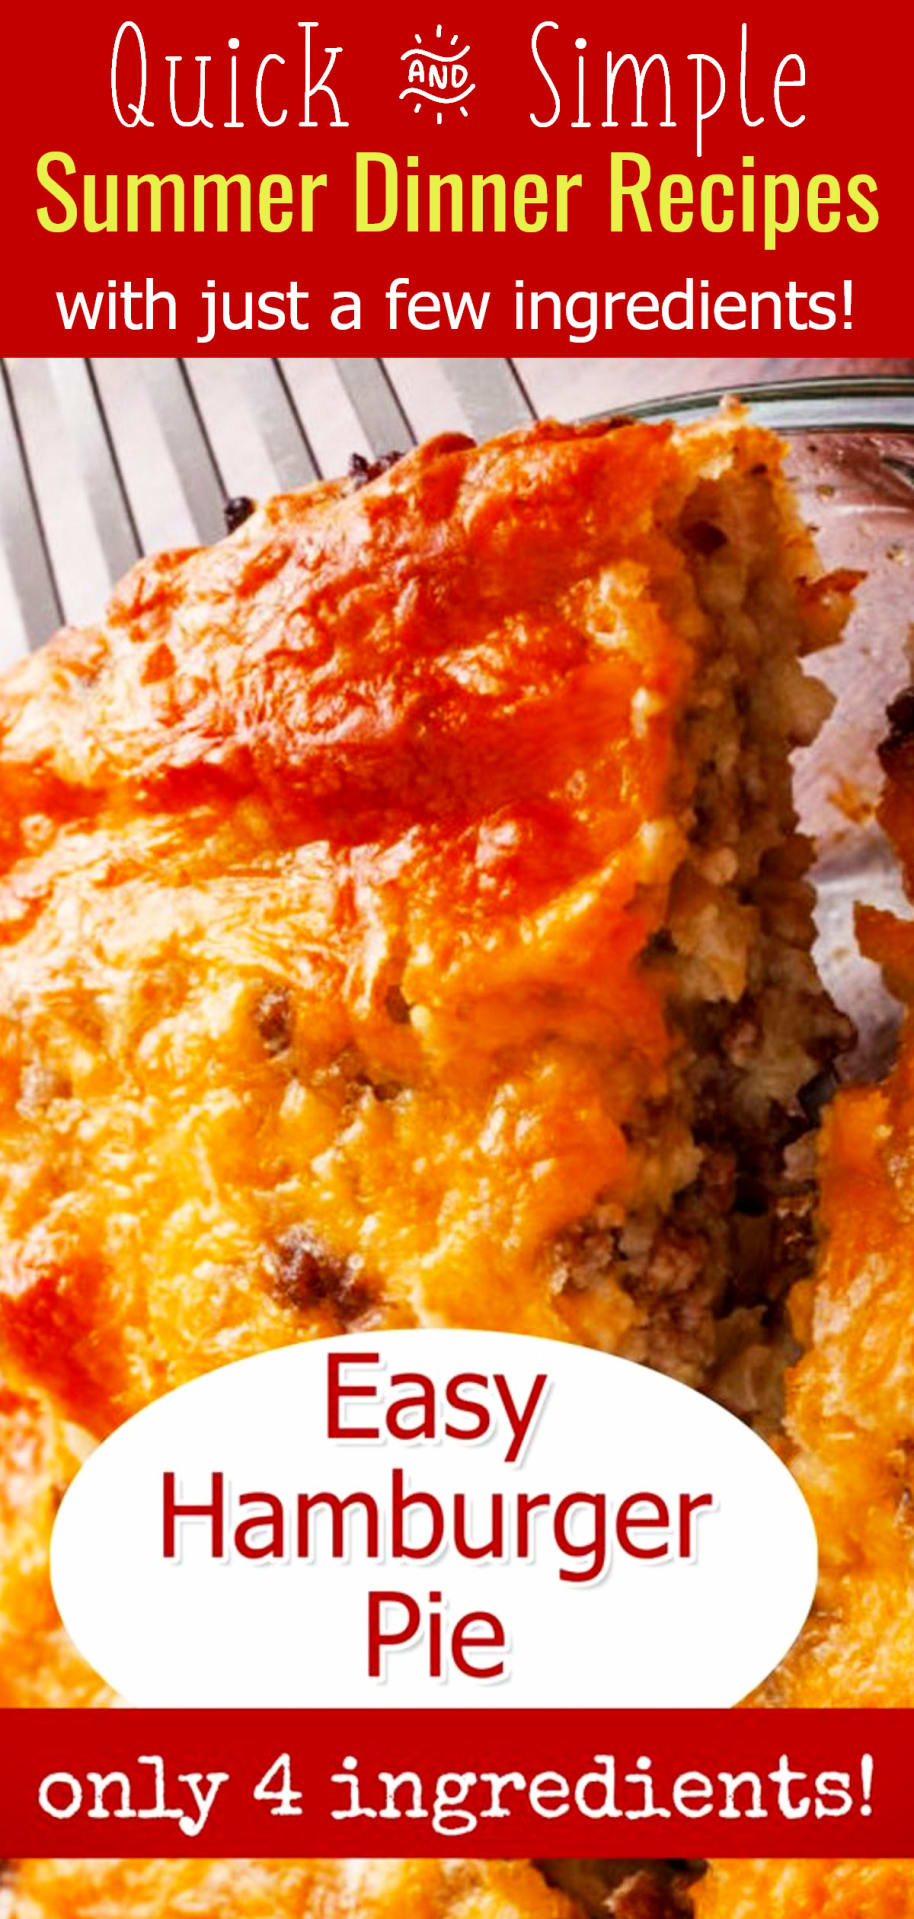 Easy Weeknight Dinner Recipes fr the family on a budget - Quick and Simple Dinner Recipes With Few Ingredients